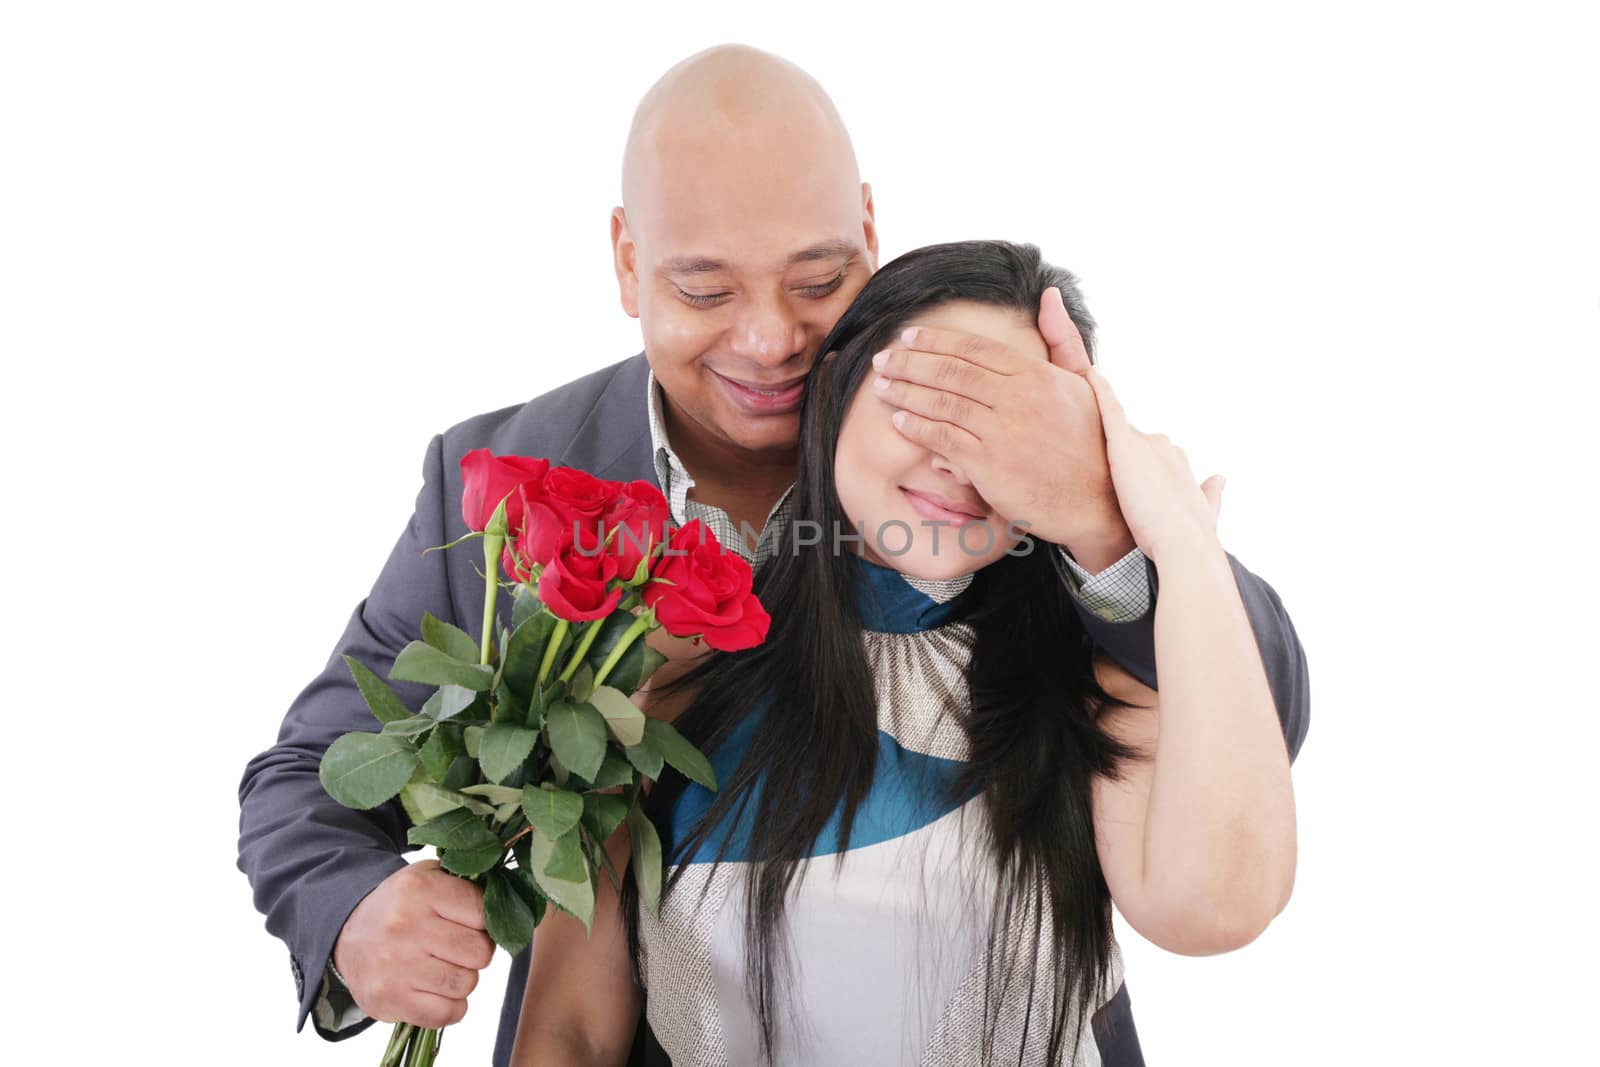 Man offering a bouquet of red roses to a woman by dacasdo